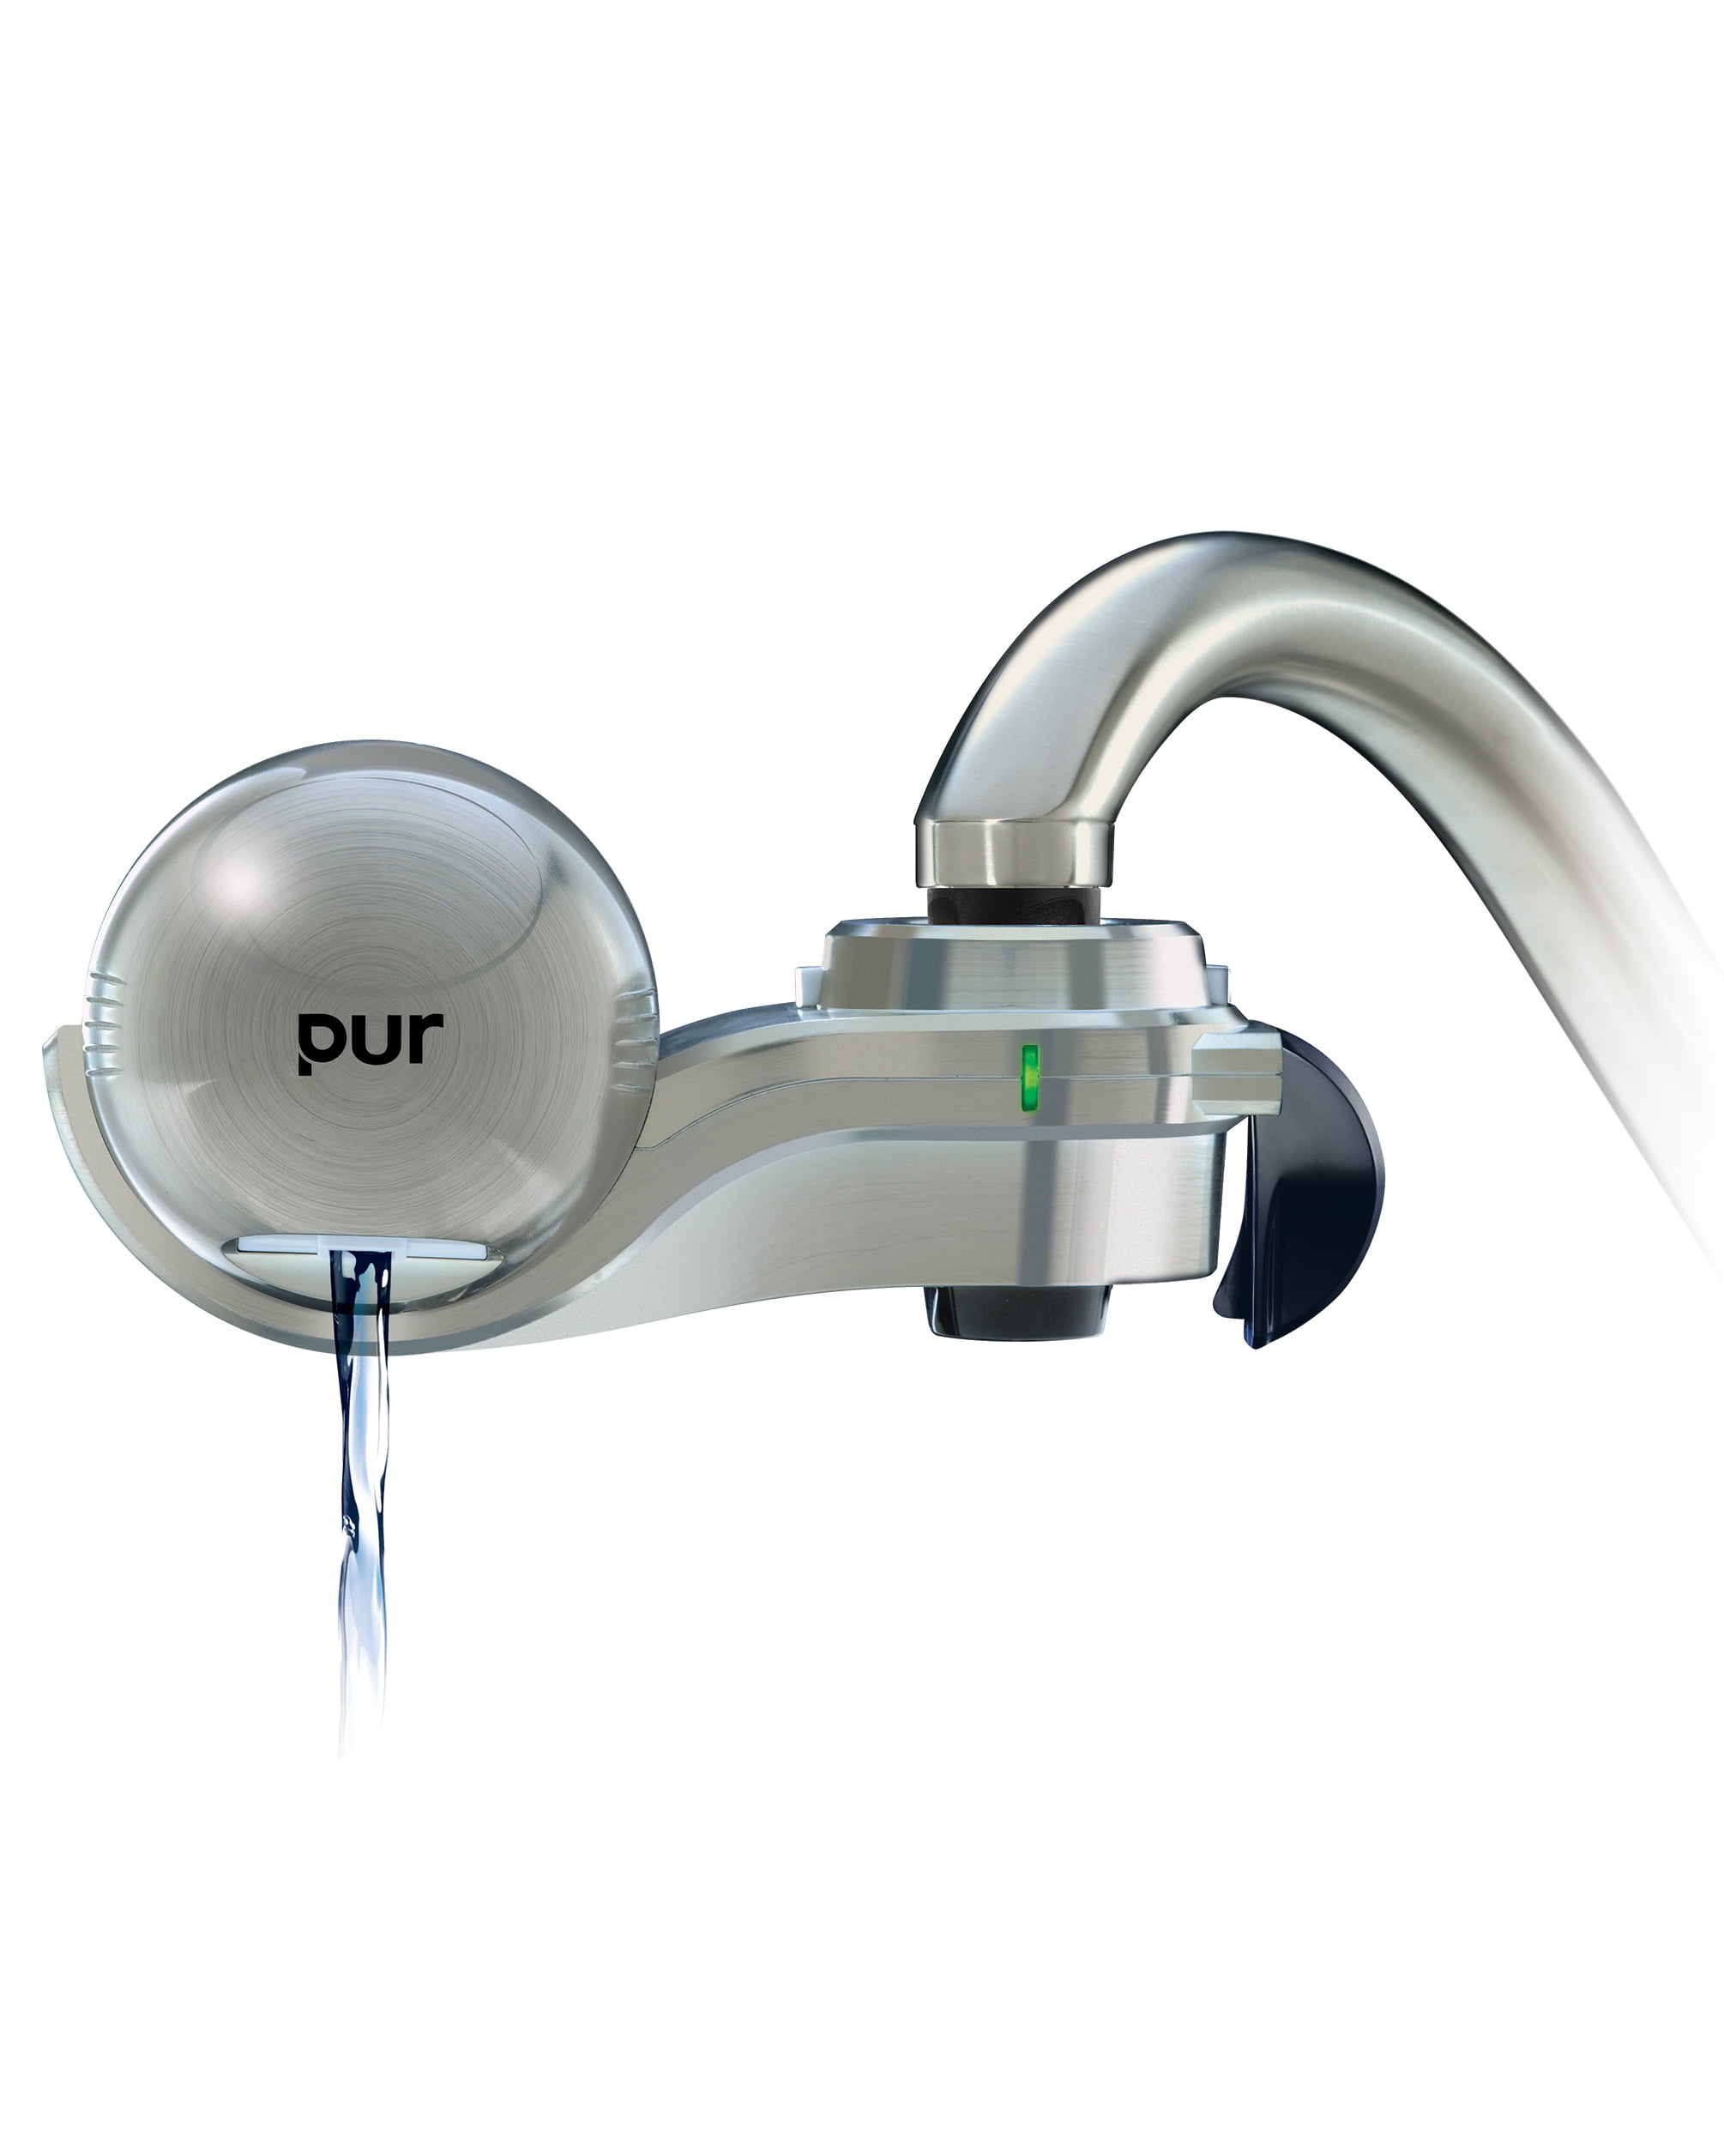 Pur Water Filter Red Light Tunkie